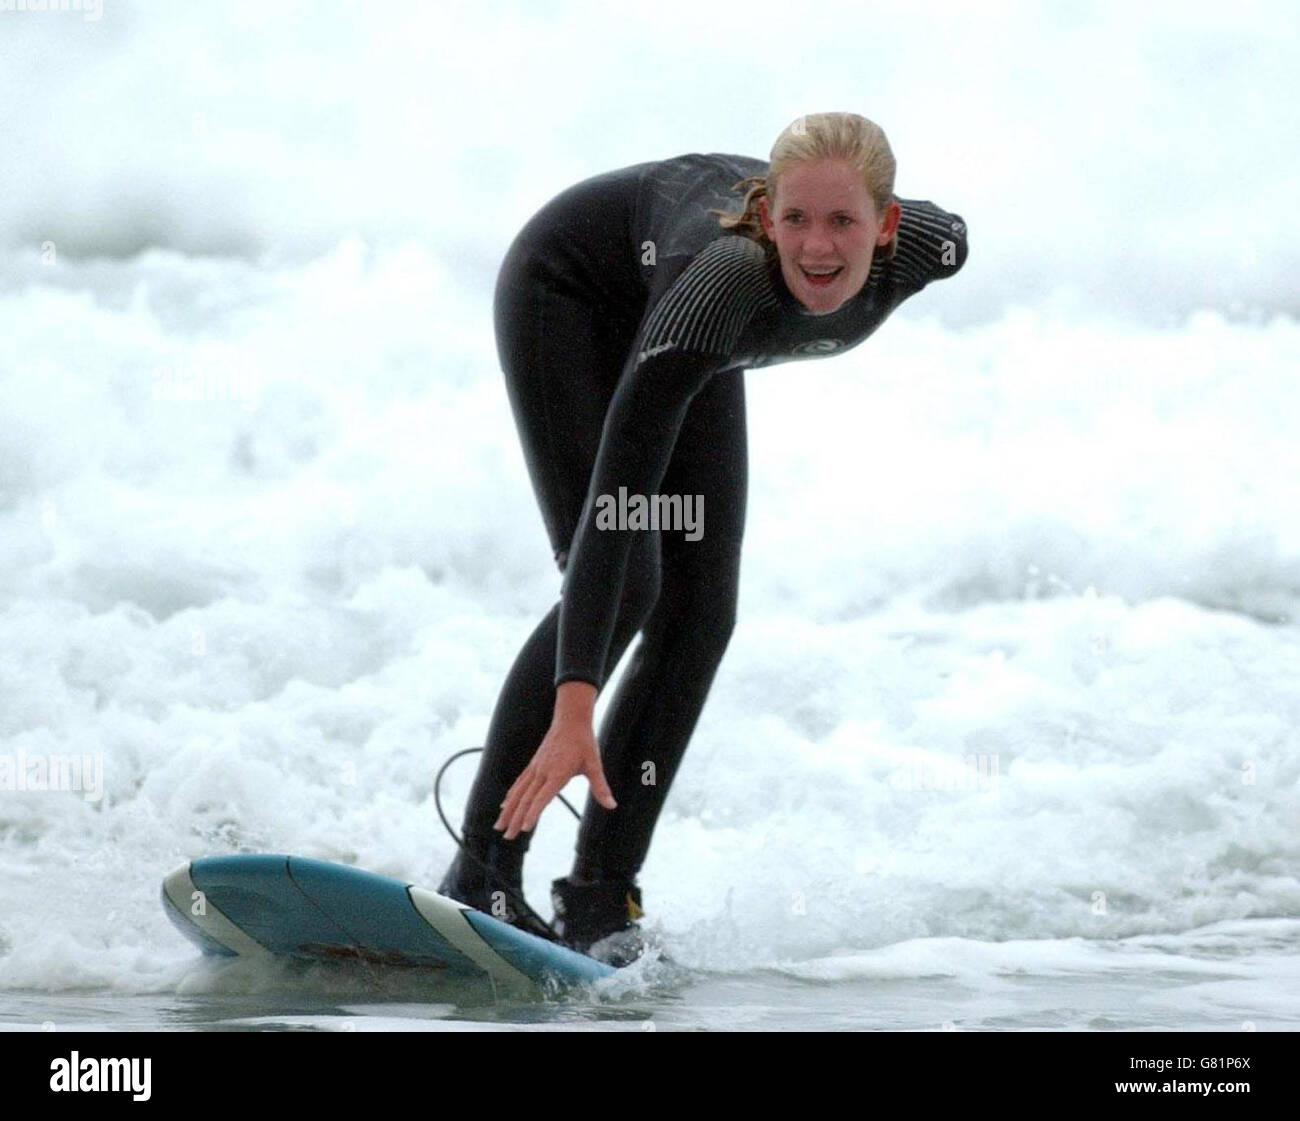 Bethany Hamilton, 15, takes to the waves in Watergate Bay, near Newquay, where she was teaching new Blue Peter presenter Gethin Jones, 26, to surf for a future episode of the children's TV programme. The teenage surfer from Hawaii lost her left arm when she was attacked by a 14ft tiger shark while she was surfing near Tunnels Beach on Kauai on October 31, 2003, when she was 13. Stock Photo